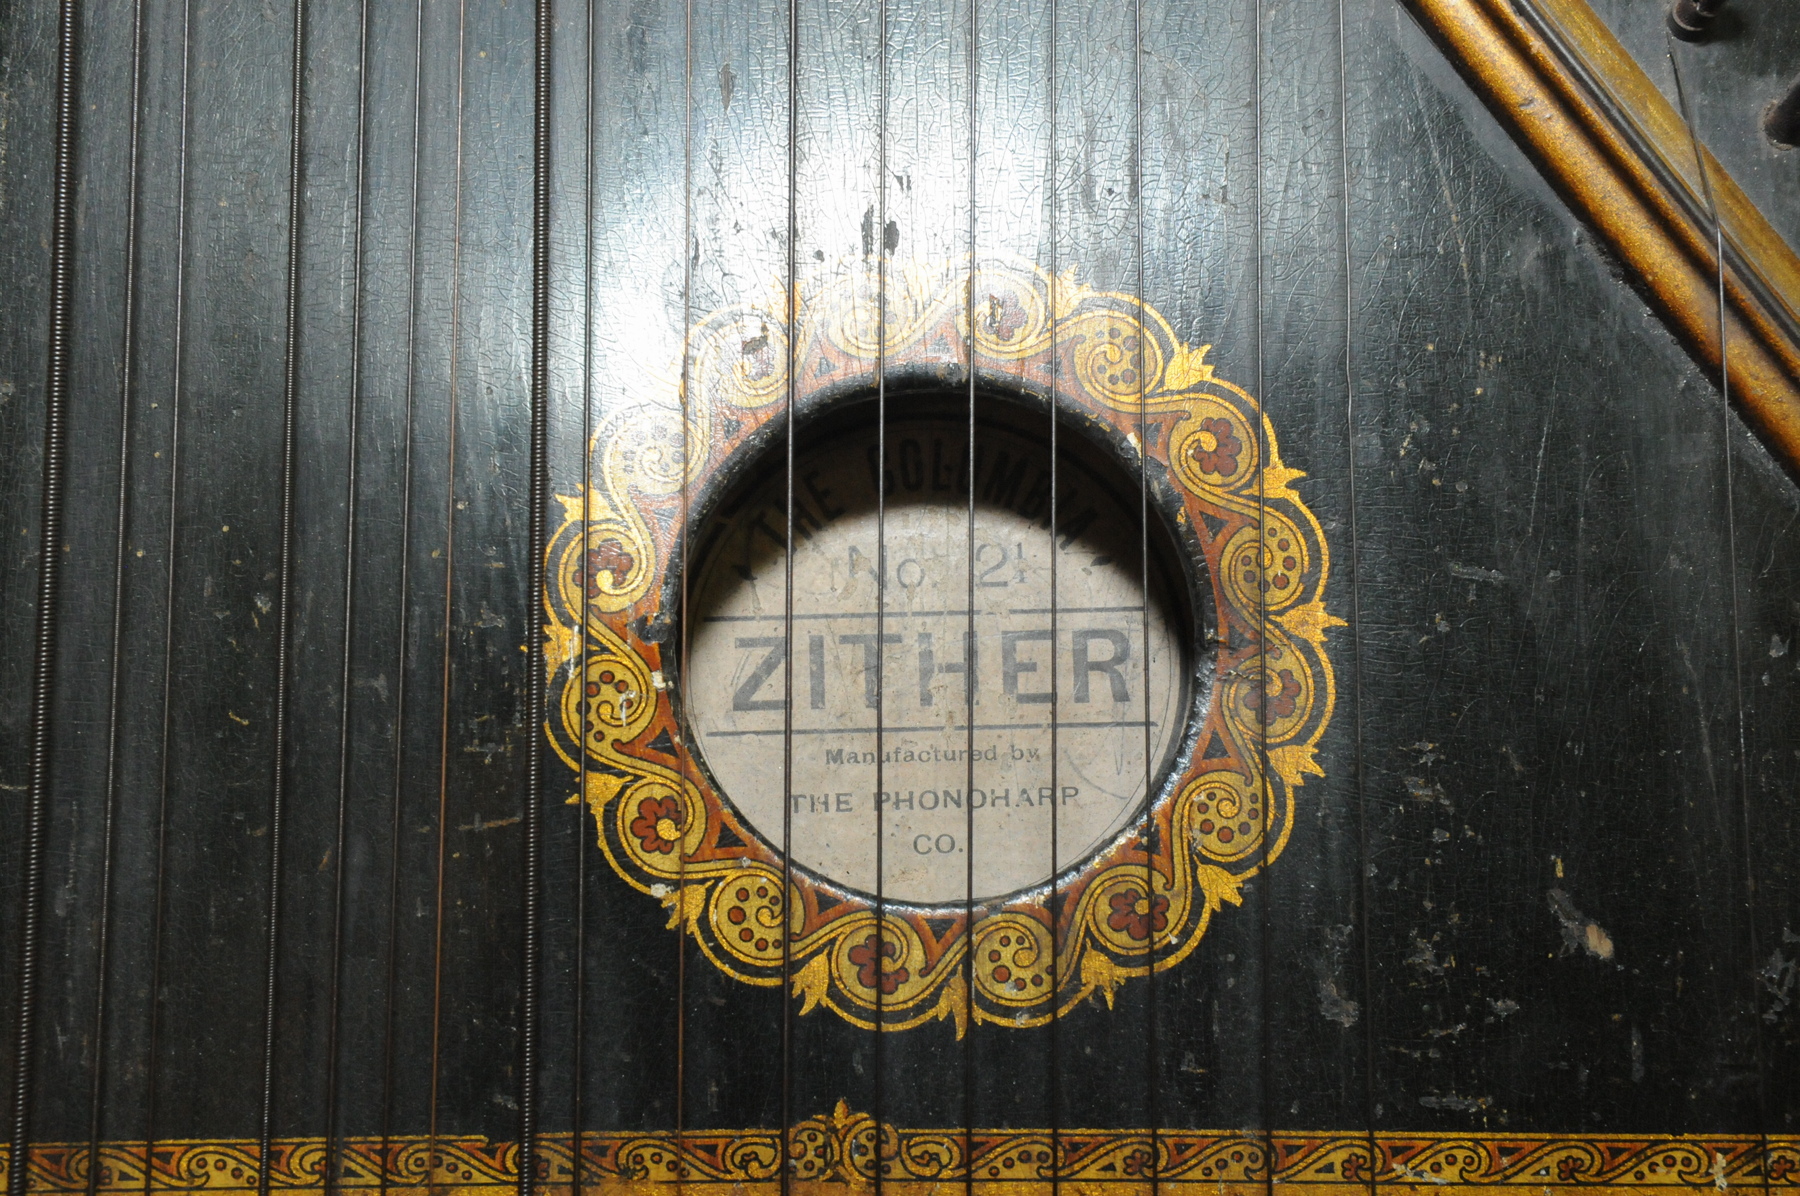 The Columbia No. 21 zither manufactured by The Phonoharp Co. - Image 2 of 3